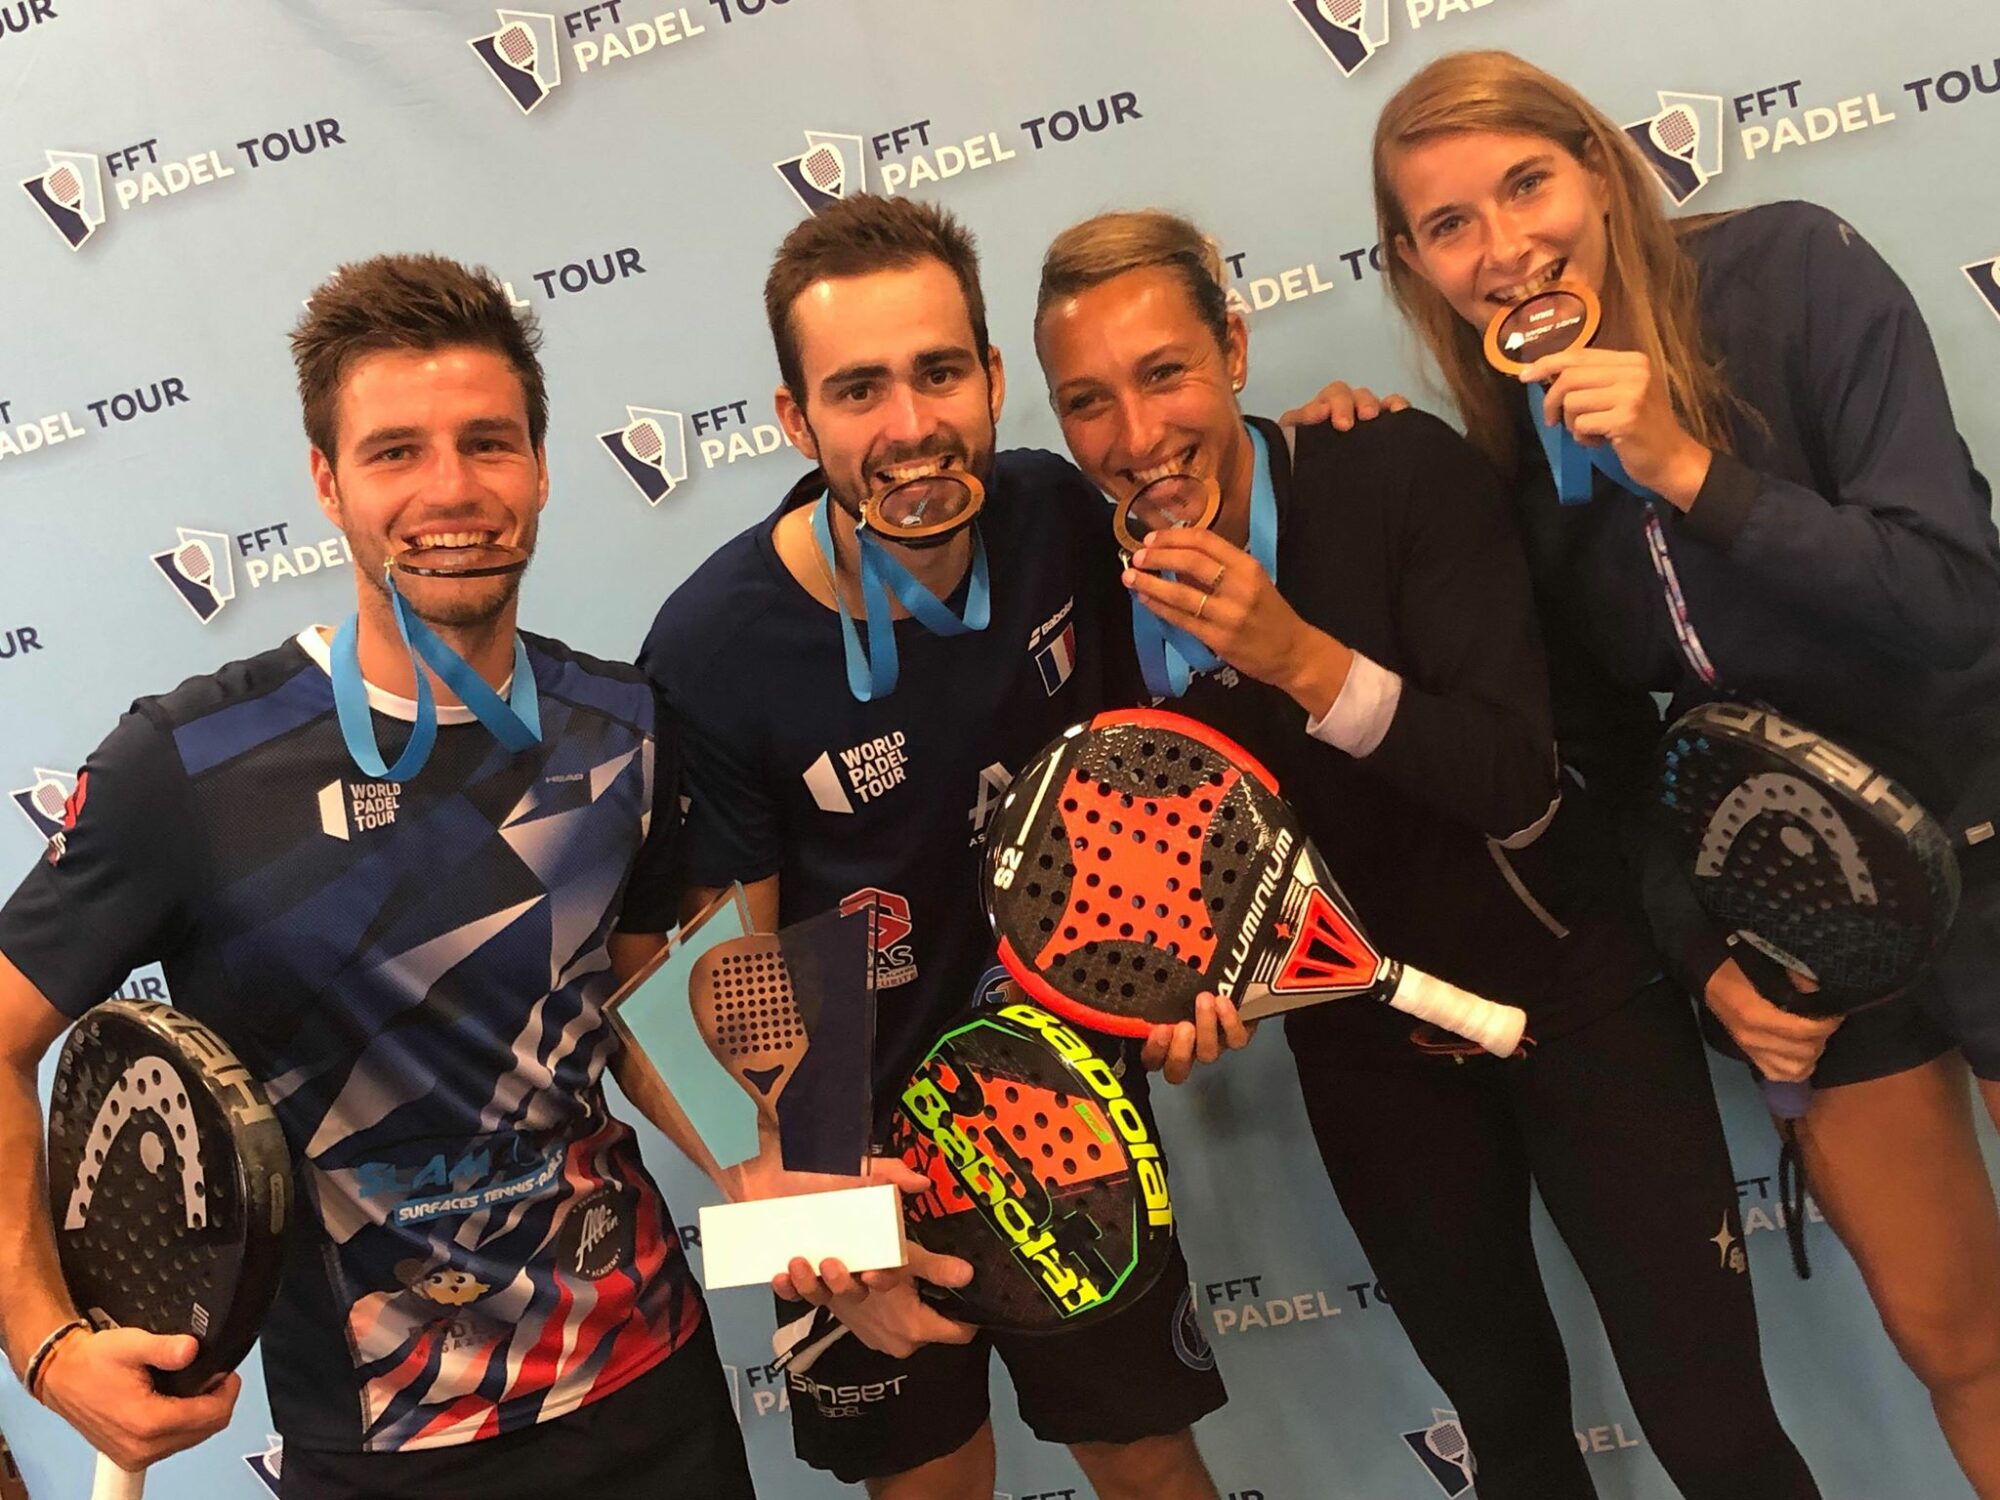 Collombon / Ginier and Bergeron / Blanqué struck again FFT Padel Tour